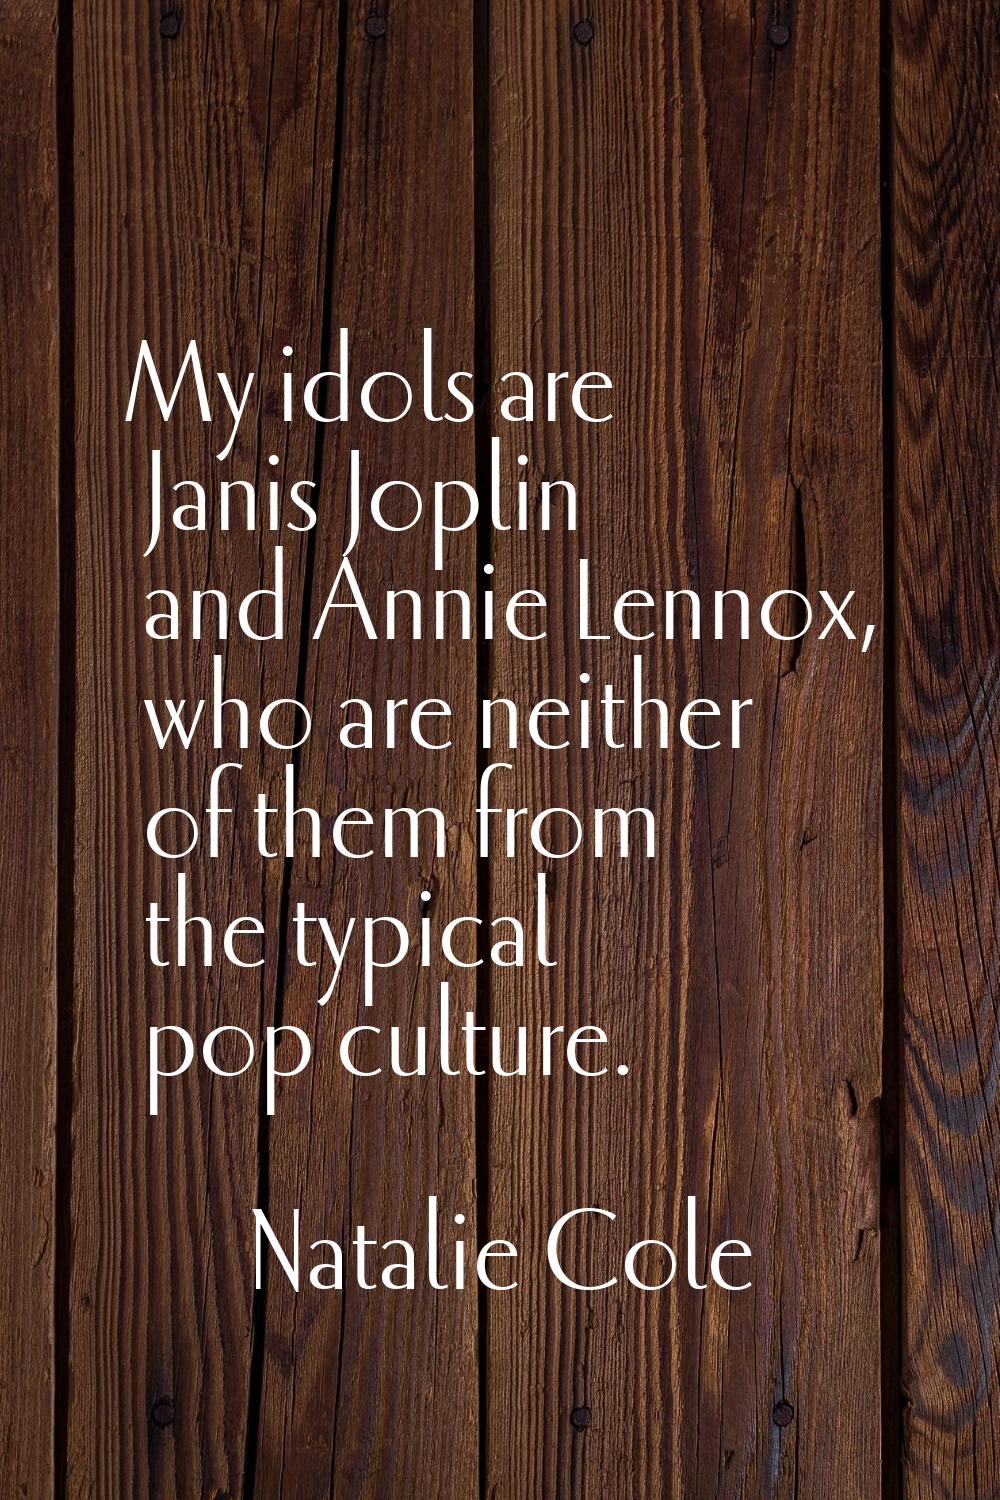 My idols are Janis Joplin and Annie Lennox, who are neither of them from the typical pop culture.